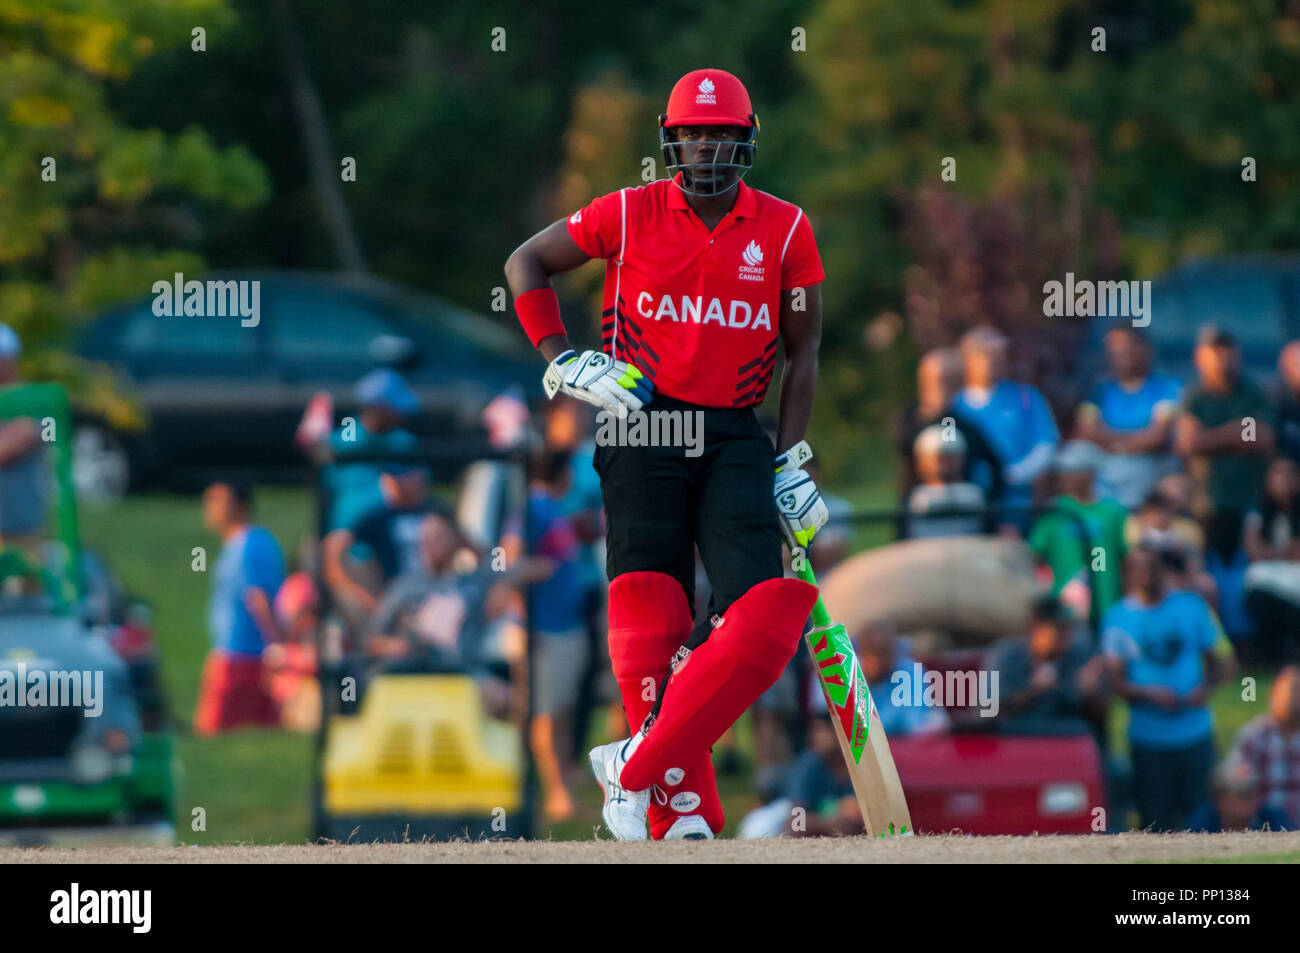 Morrisville, North Carolina, USA. 22nd Sep, 2018. Sept. 22, 2018 - Morrisville N.C., USA - Team Canada ROGRIGO AUSTINE THOMAS (46) waits to bat during the ICC World T20 America's ''A'' Qualifier cricket match between USA and Canada. Both teams played to a 140/8 tie with Canada winning the Super Over for the overall win. In addition to USA and Canada, the ICC World T20 America's ''A'' Qualifier also features Belize and Panama in the six-day tournament that ends Sept. 26. Credit: Timothy L. Hale/ZUMA Wire/Alamy Live News Stock Photo